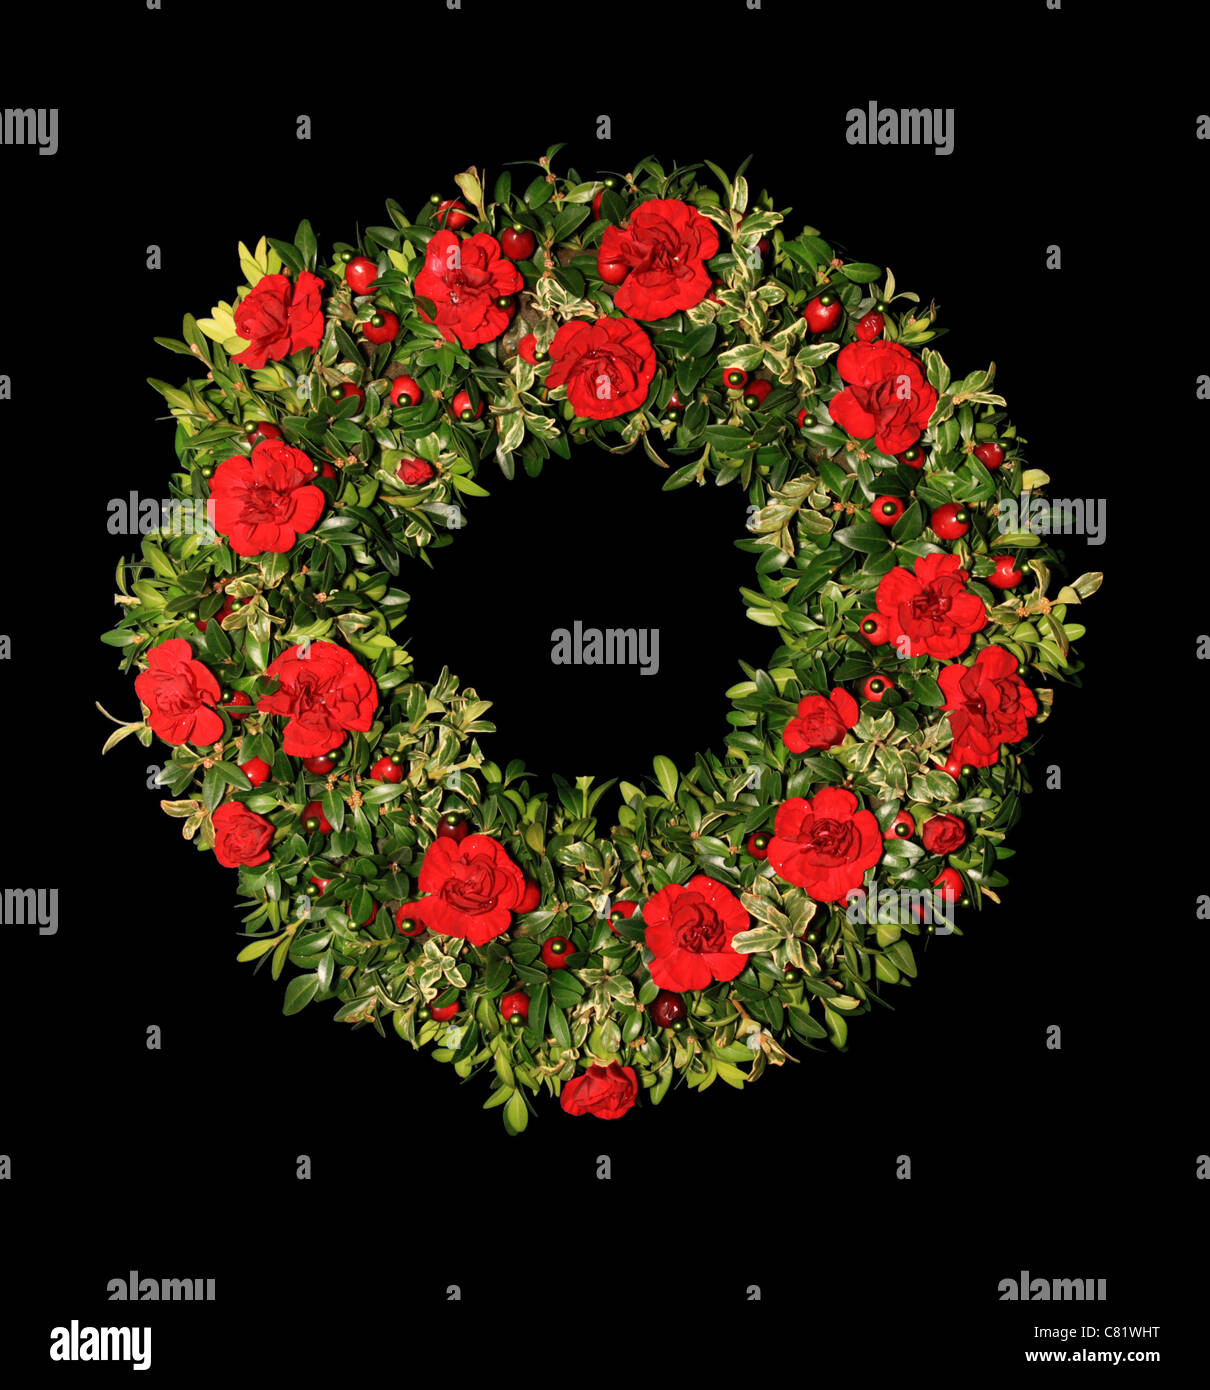 red carnation, boxwood, and cranberry Christmas floral wreath on a black background Stock Photo